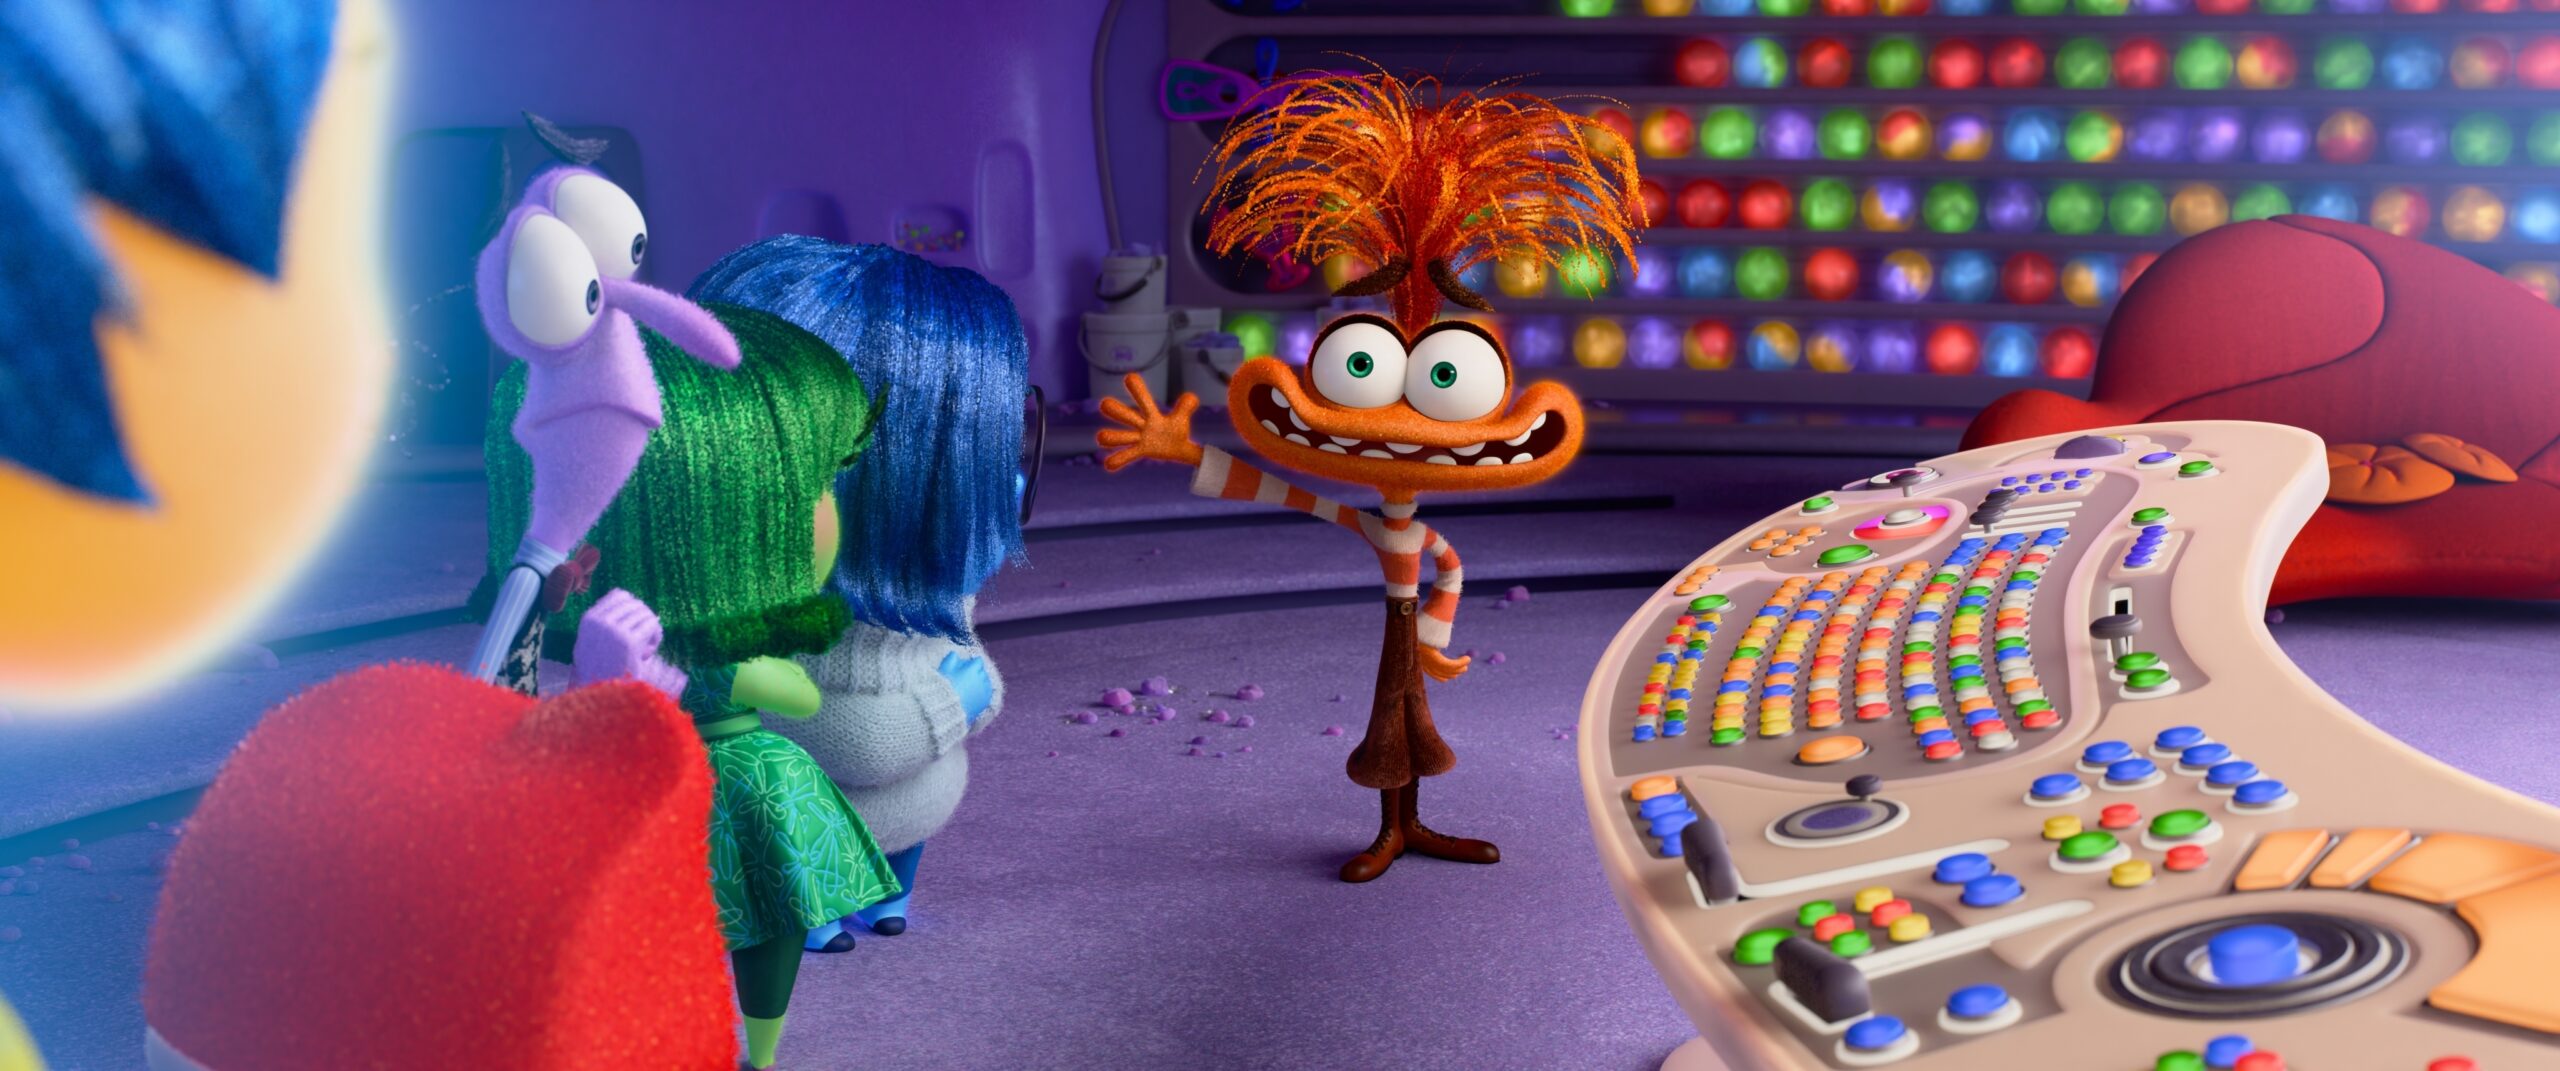 What Adults Can Learn from 'Inside Out 2' About Their Own Complex Emotions